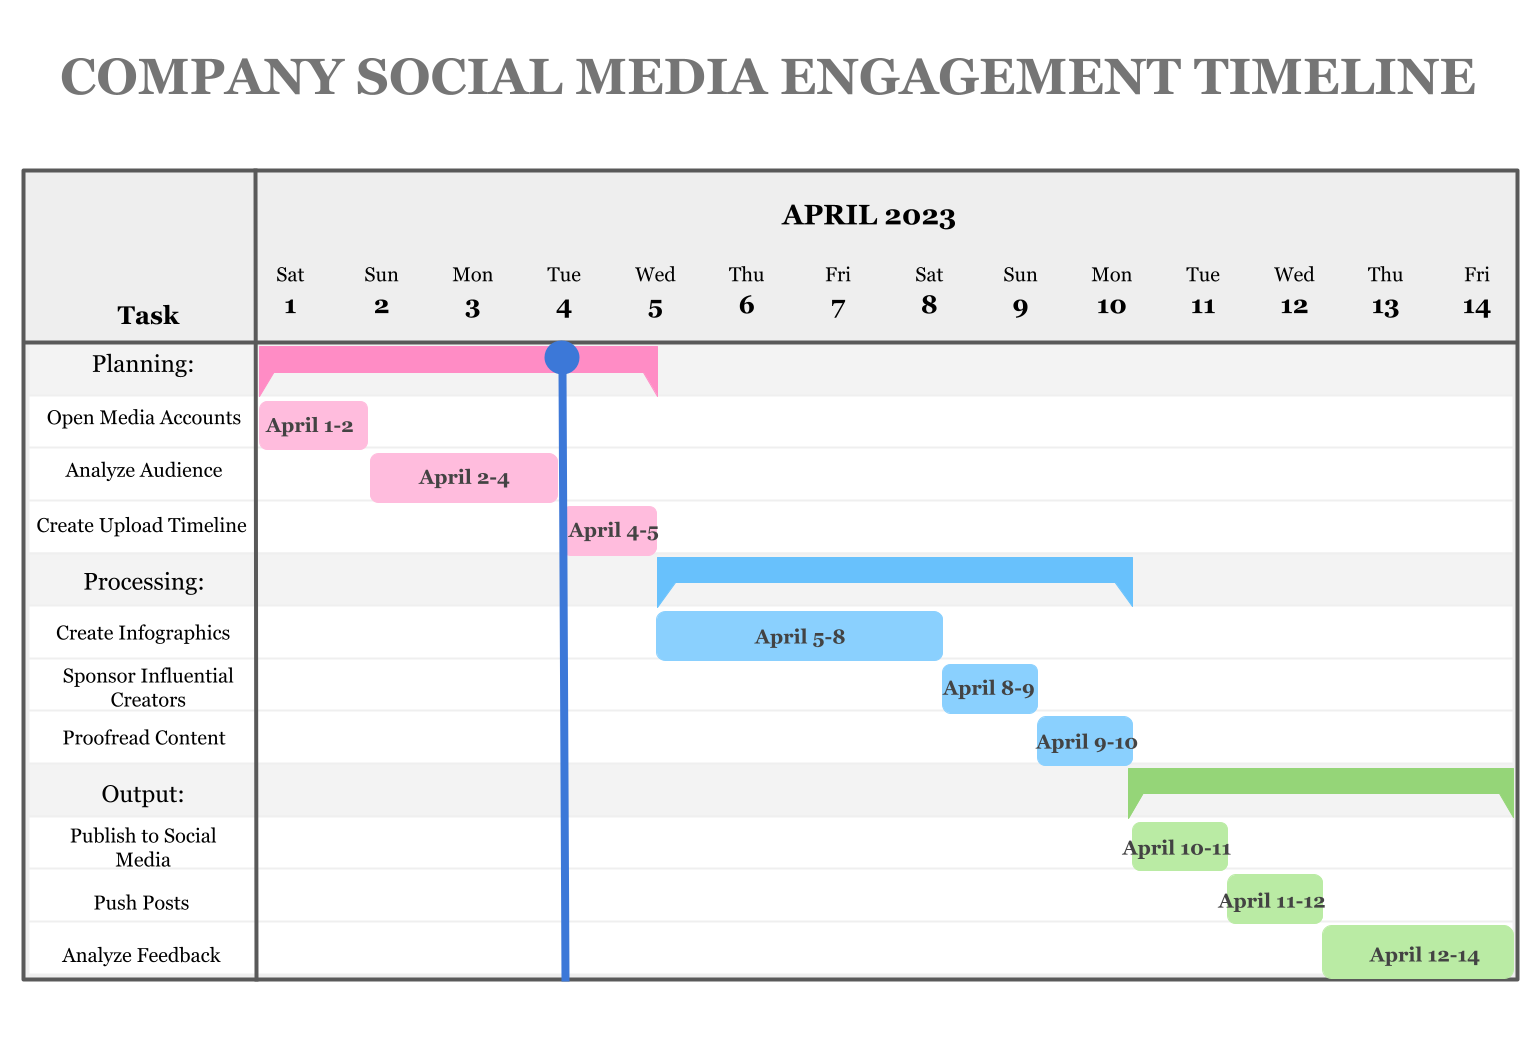 Gantt chart for a made-up company's social media engagement timeline.